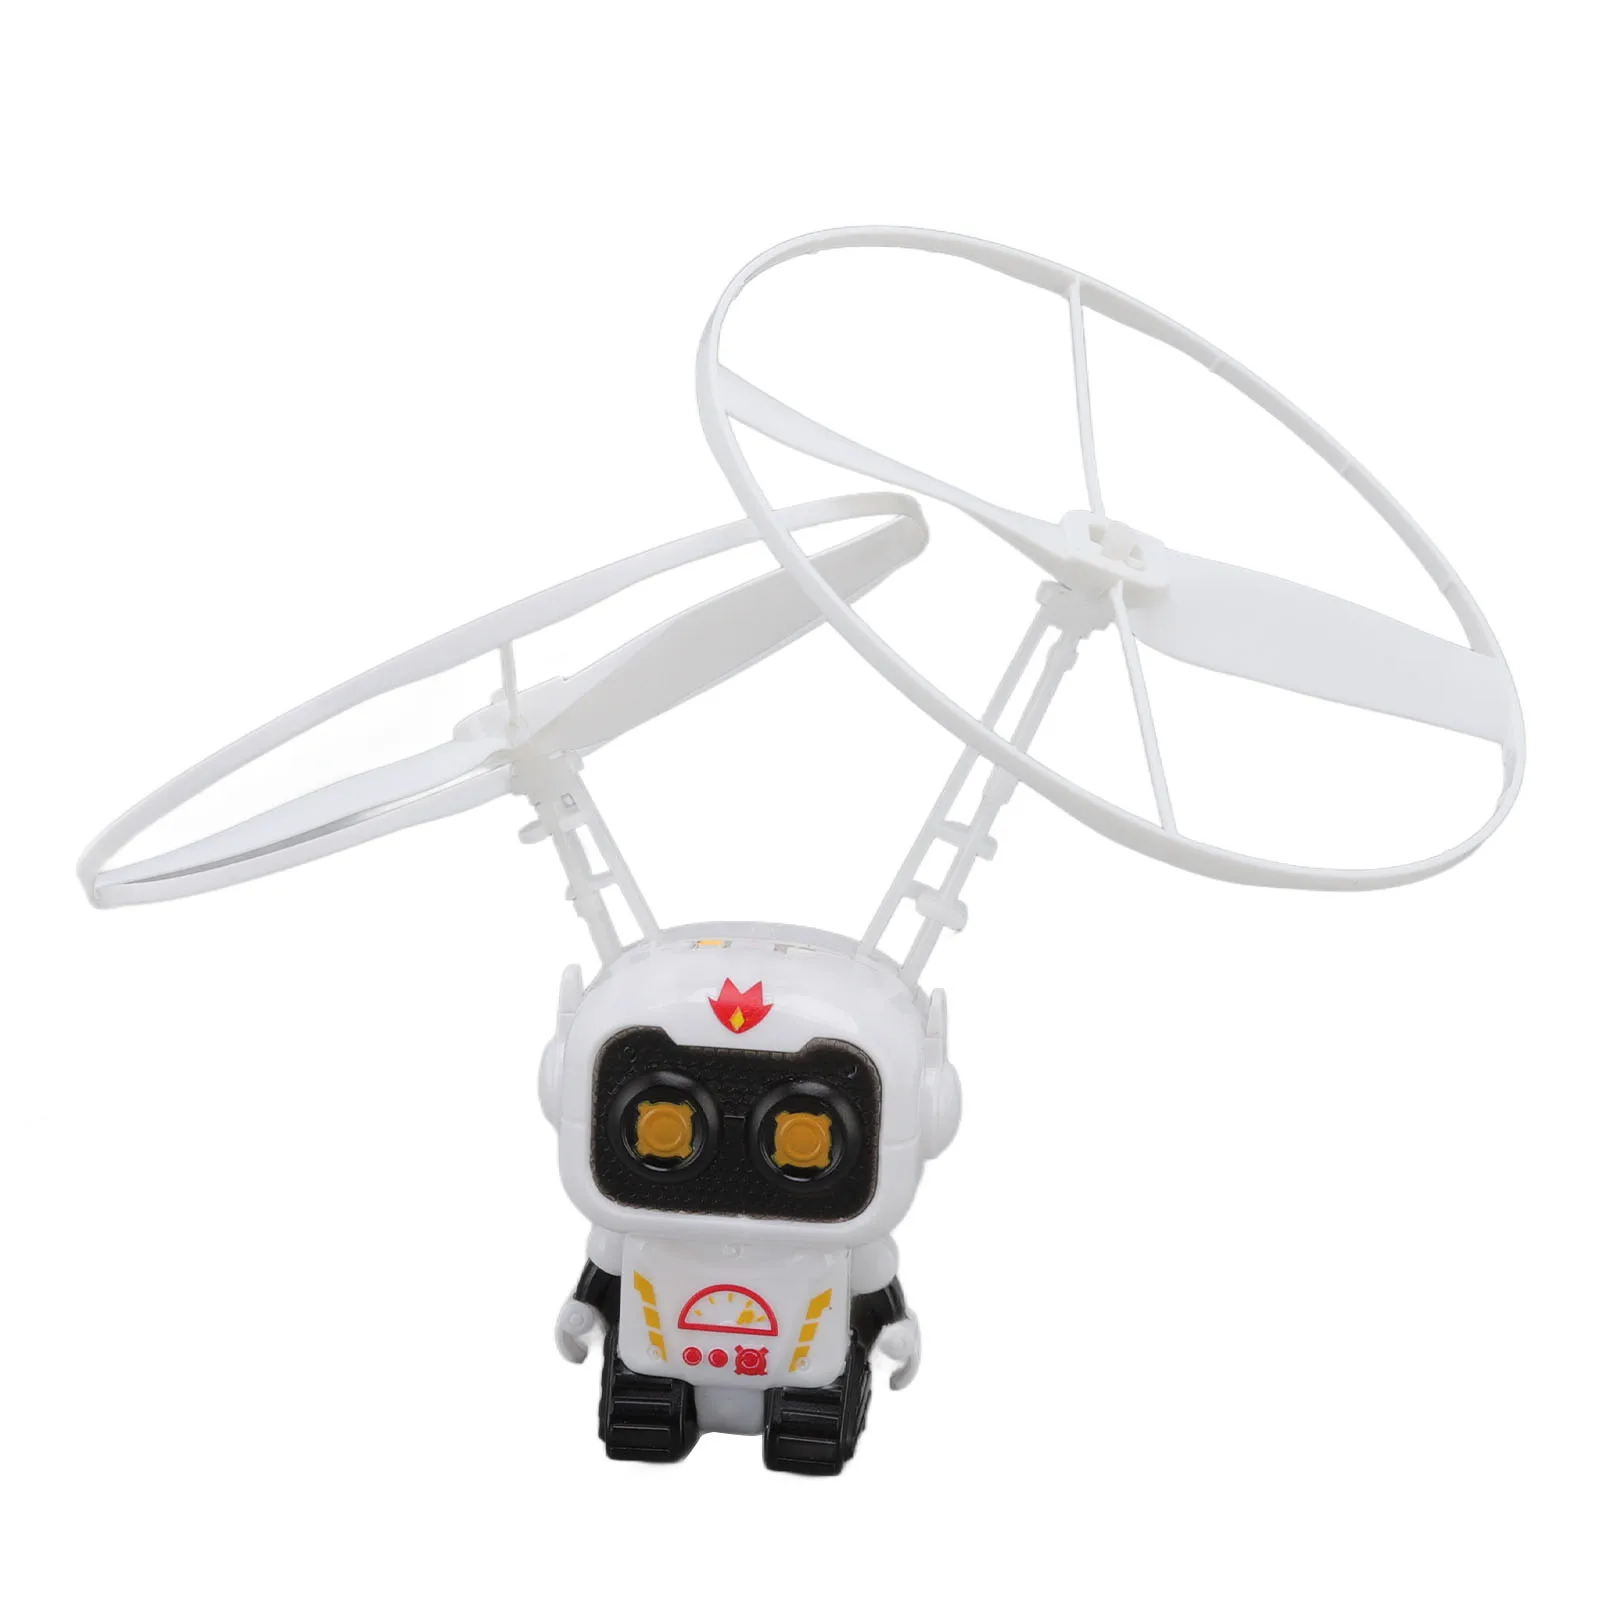 Wireless Drones Toys Infrared Induction Rc Flying Toy Built In Led Light - £12.50 GBP